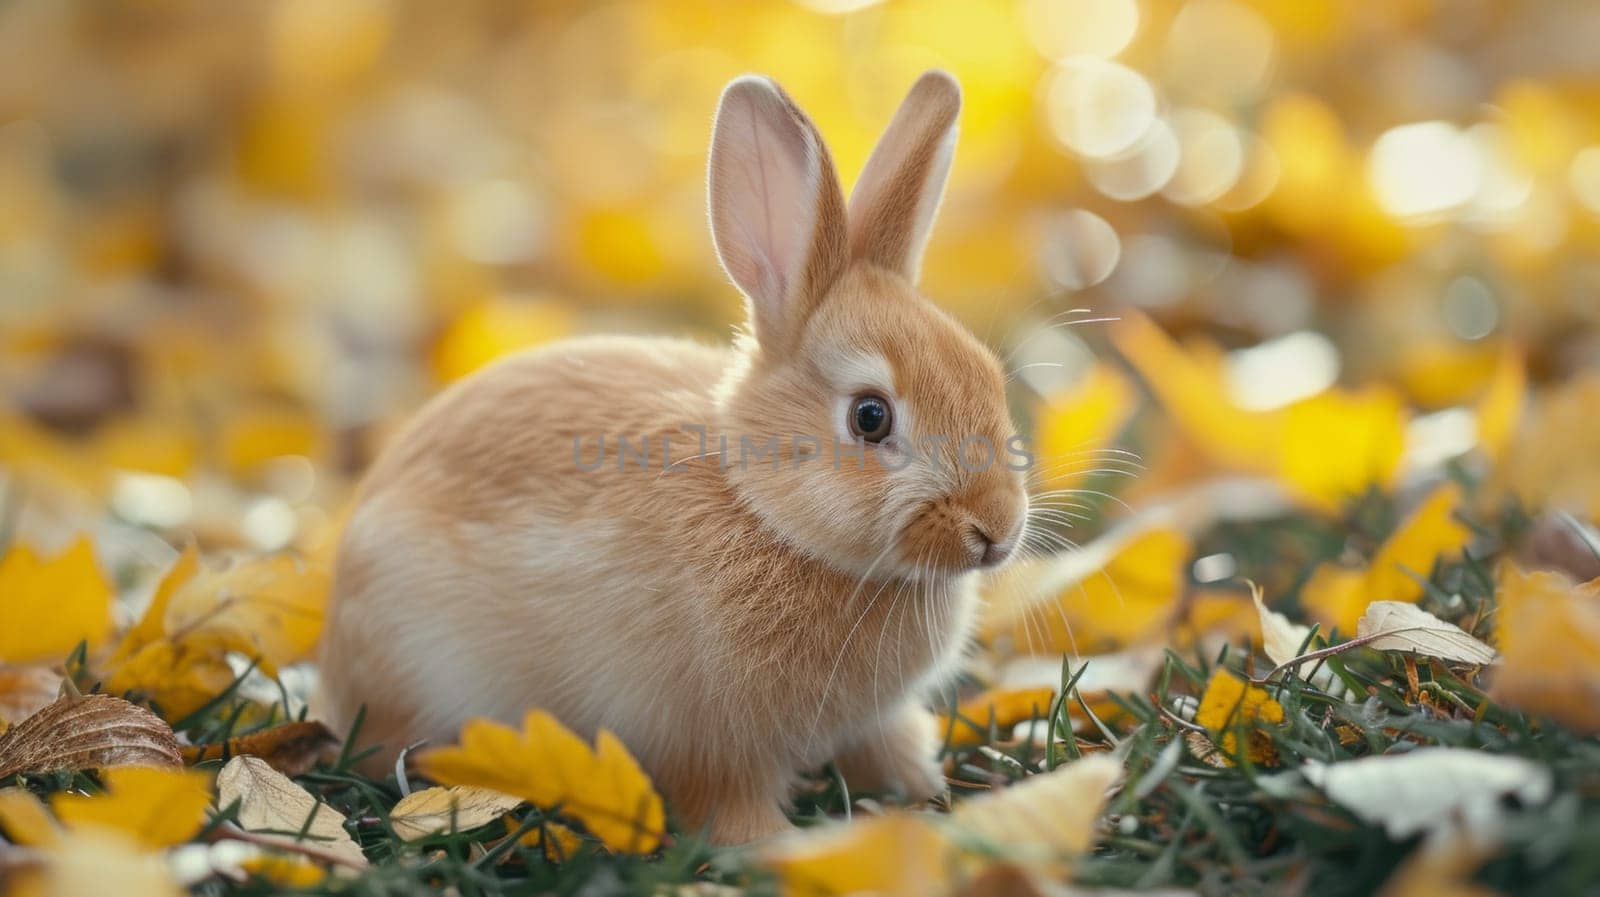 A small rabbit sitting in a field of yellow leaves